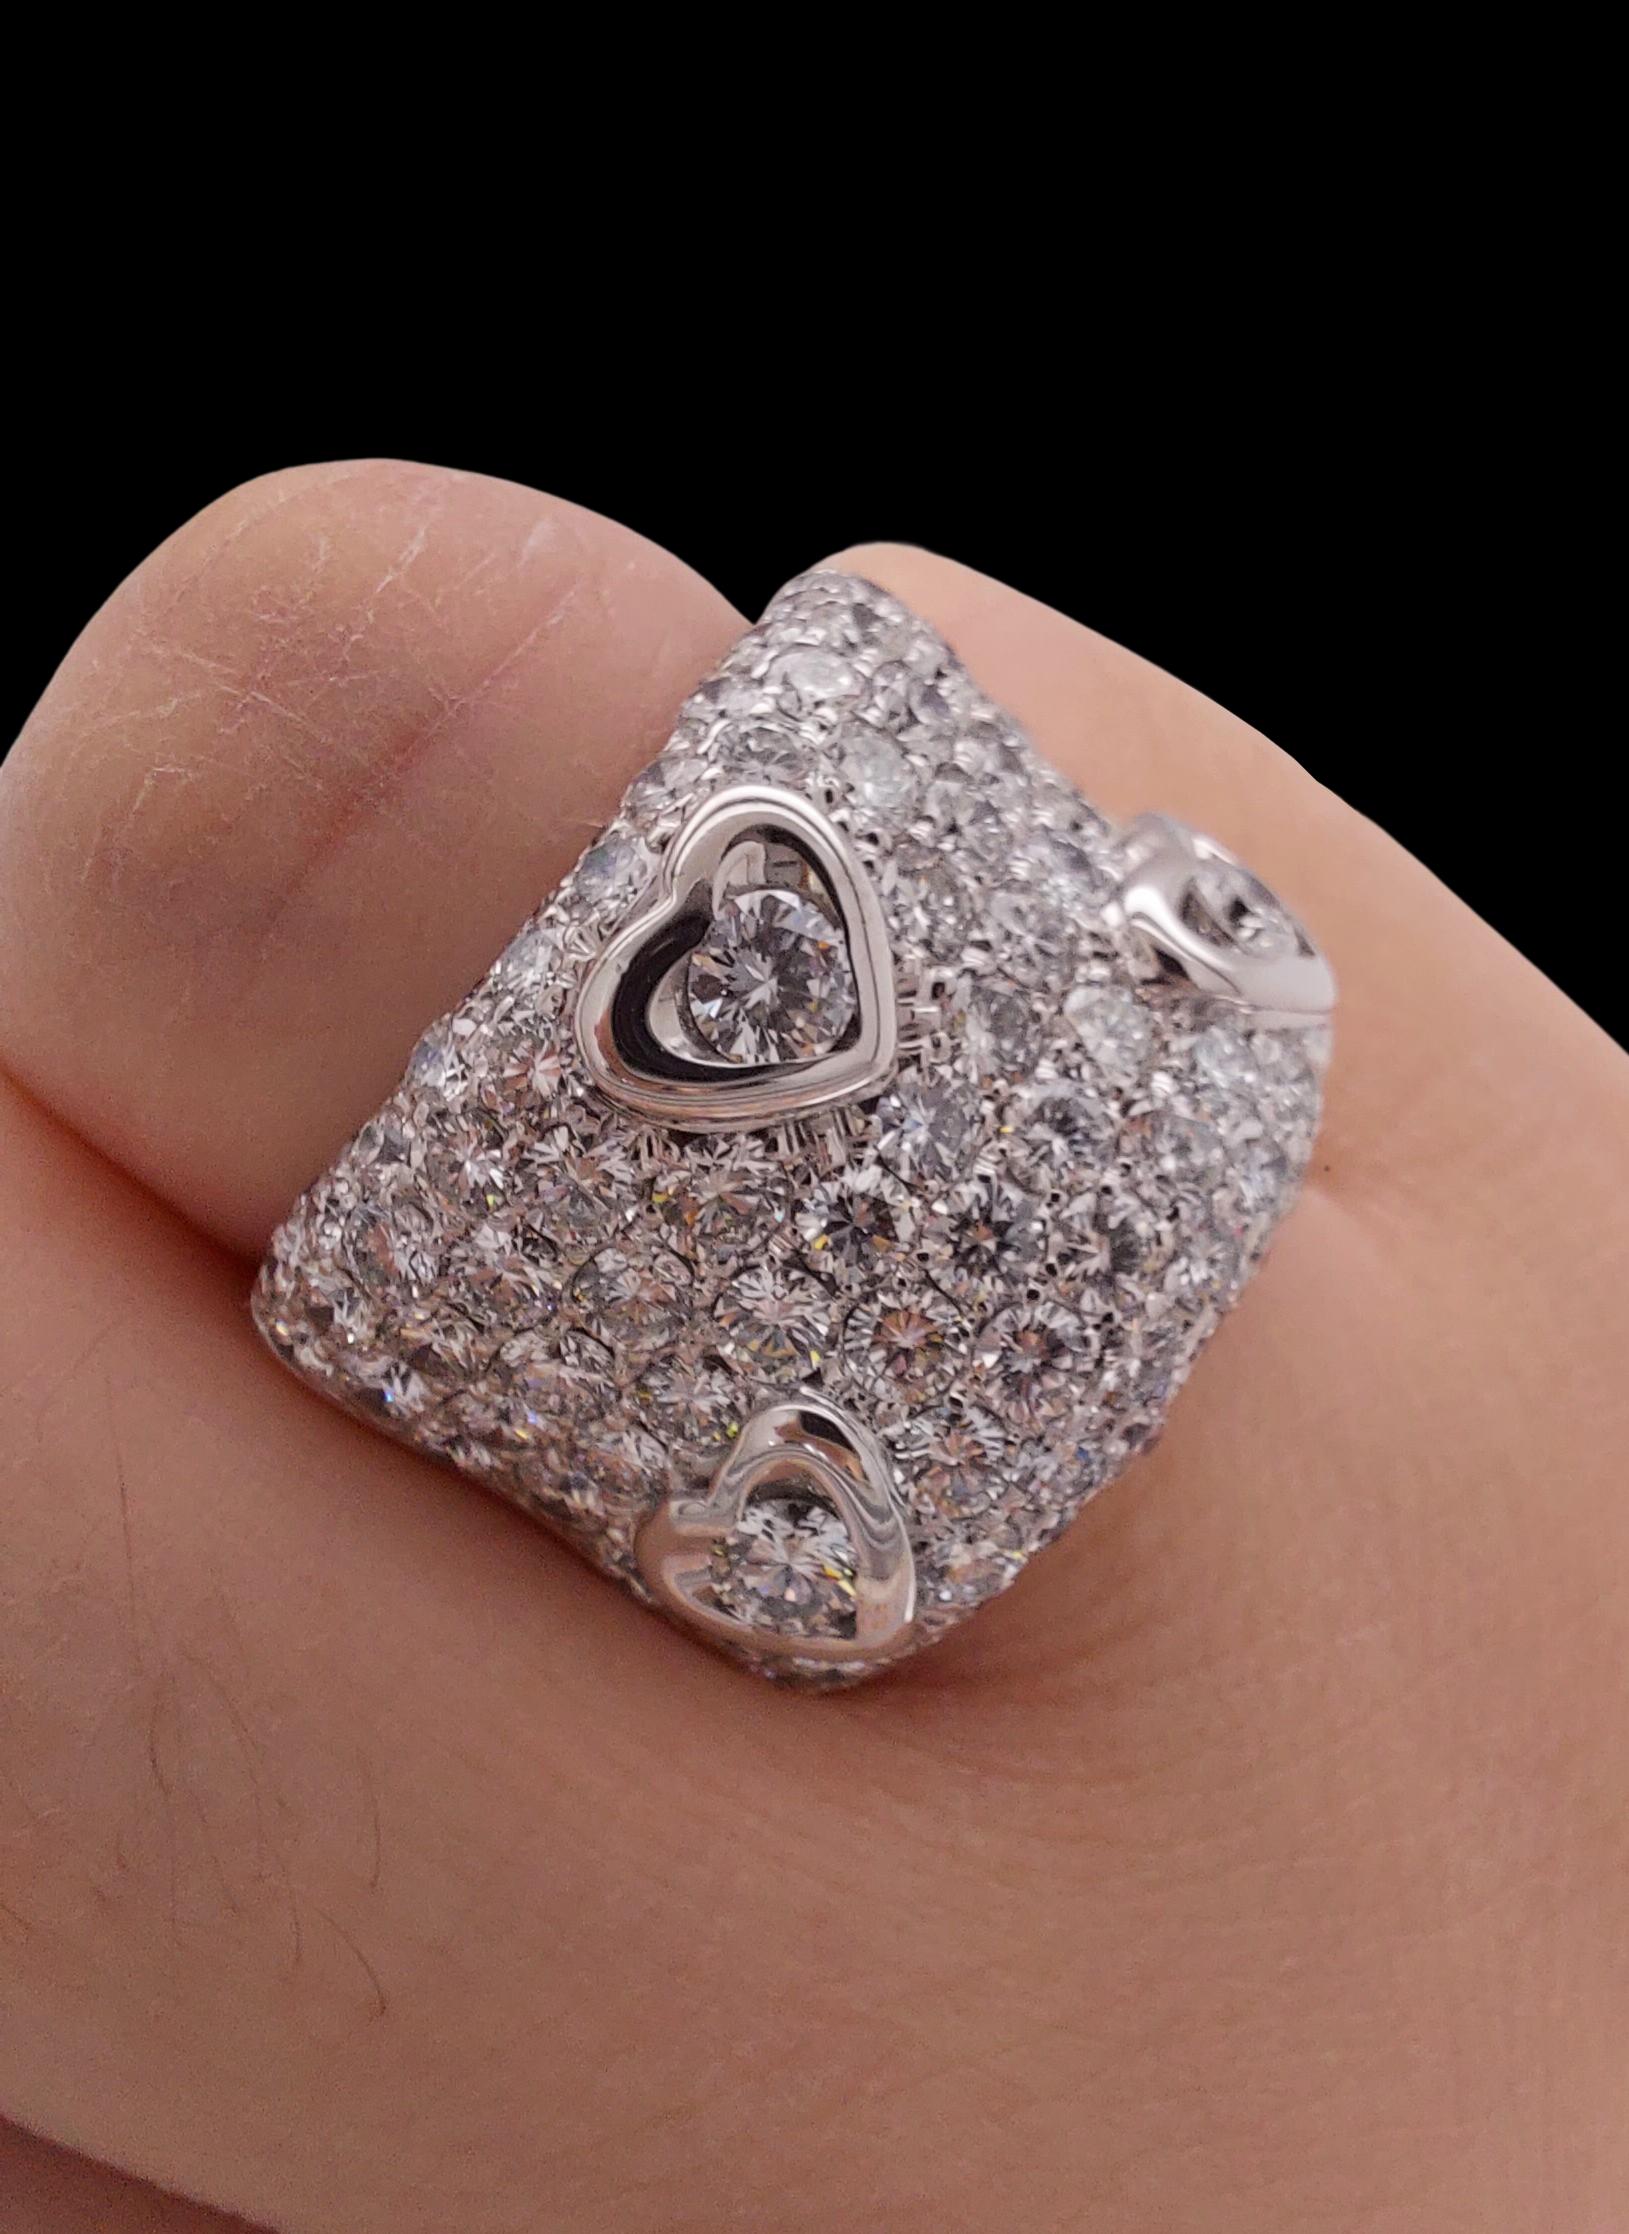 Stunning 18kt Gold Ring With 5.65ct Brilliant Cut Diamonds, 3 Set in Heart Shape 4